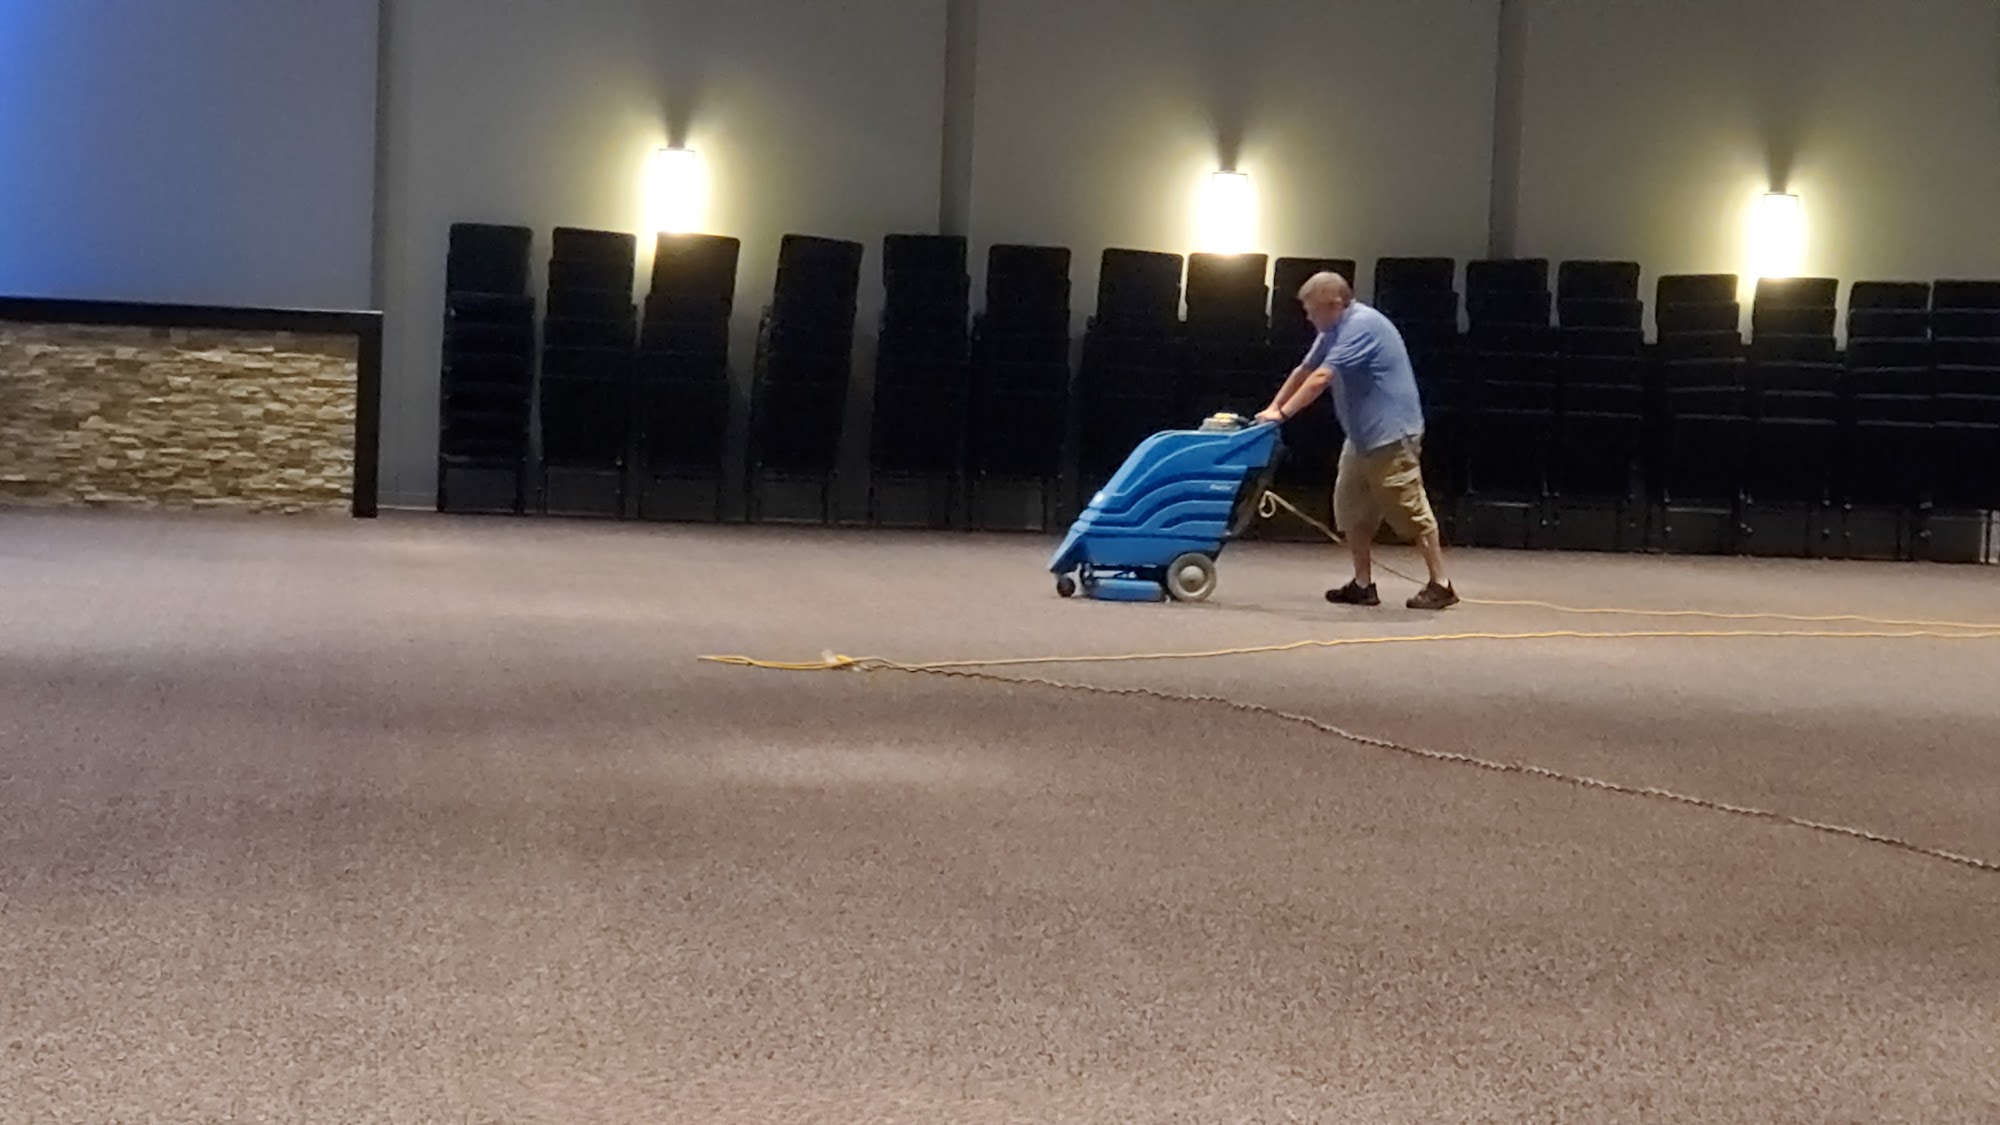 Quality Carpet Cleaning